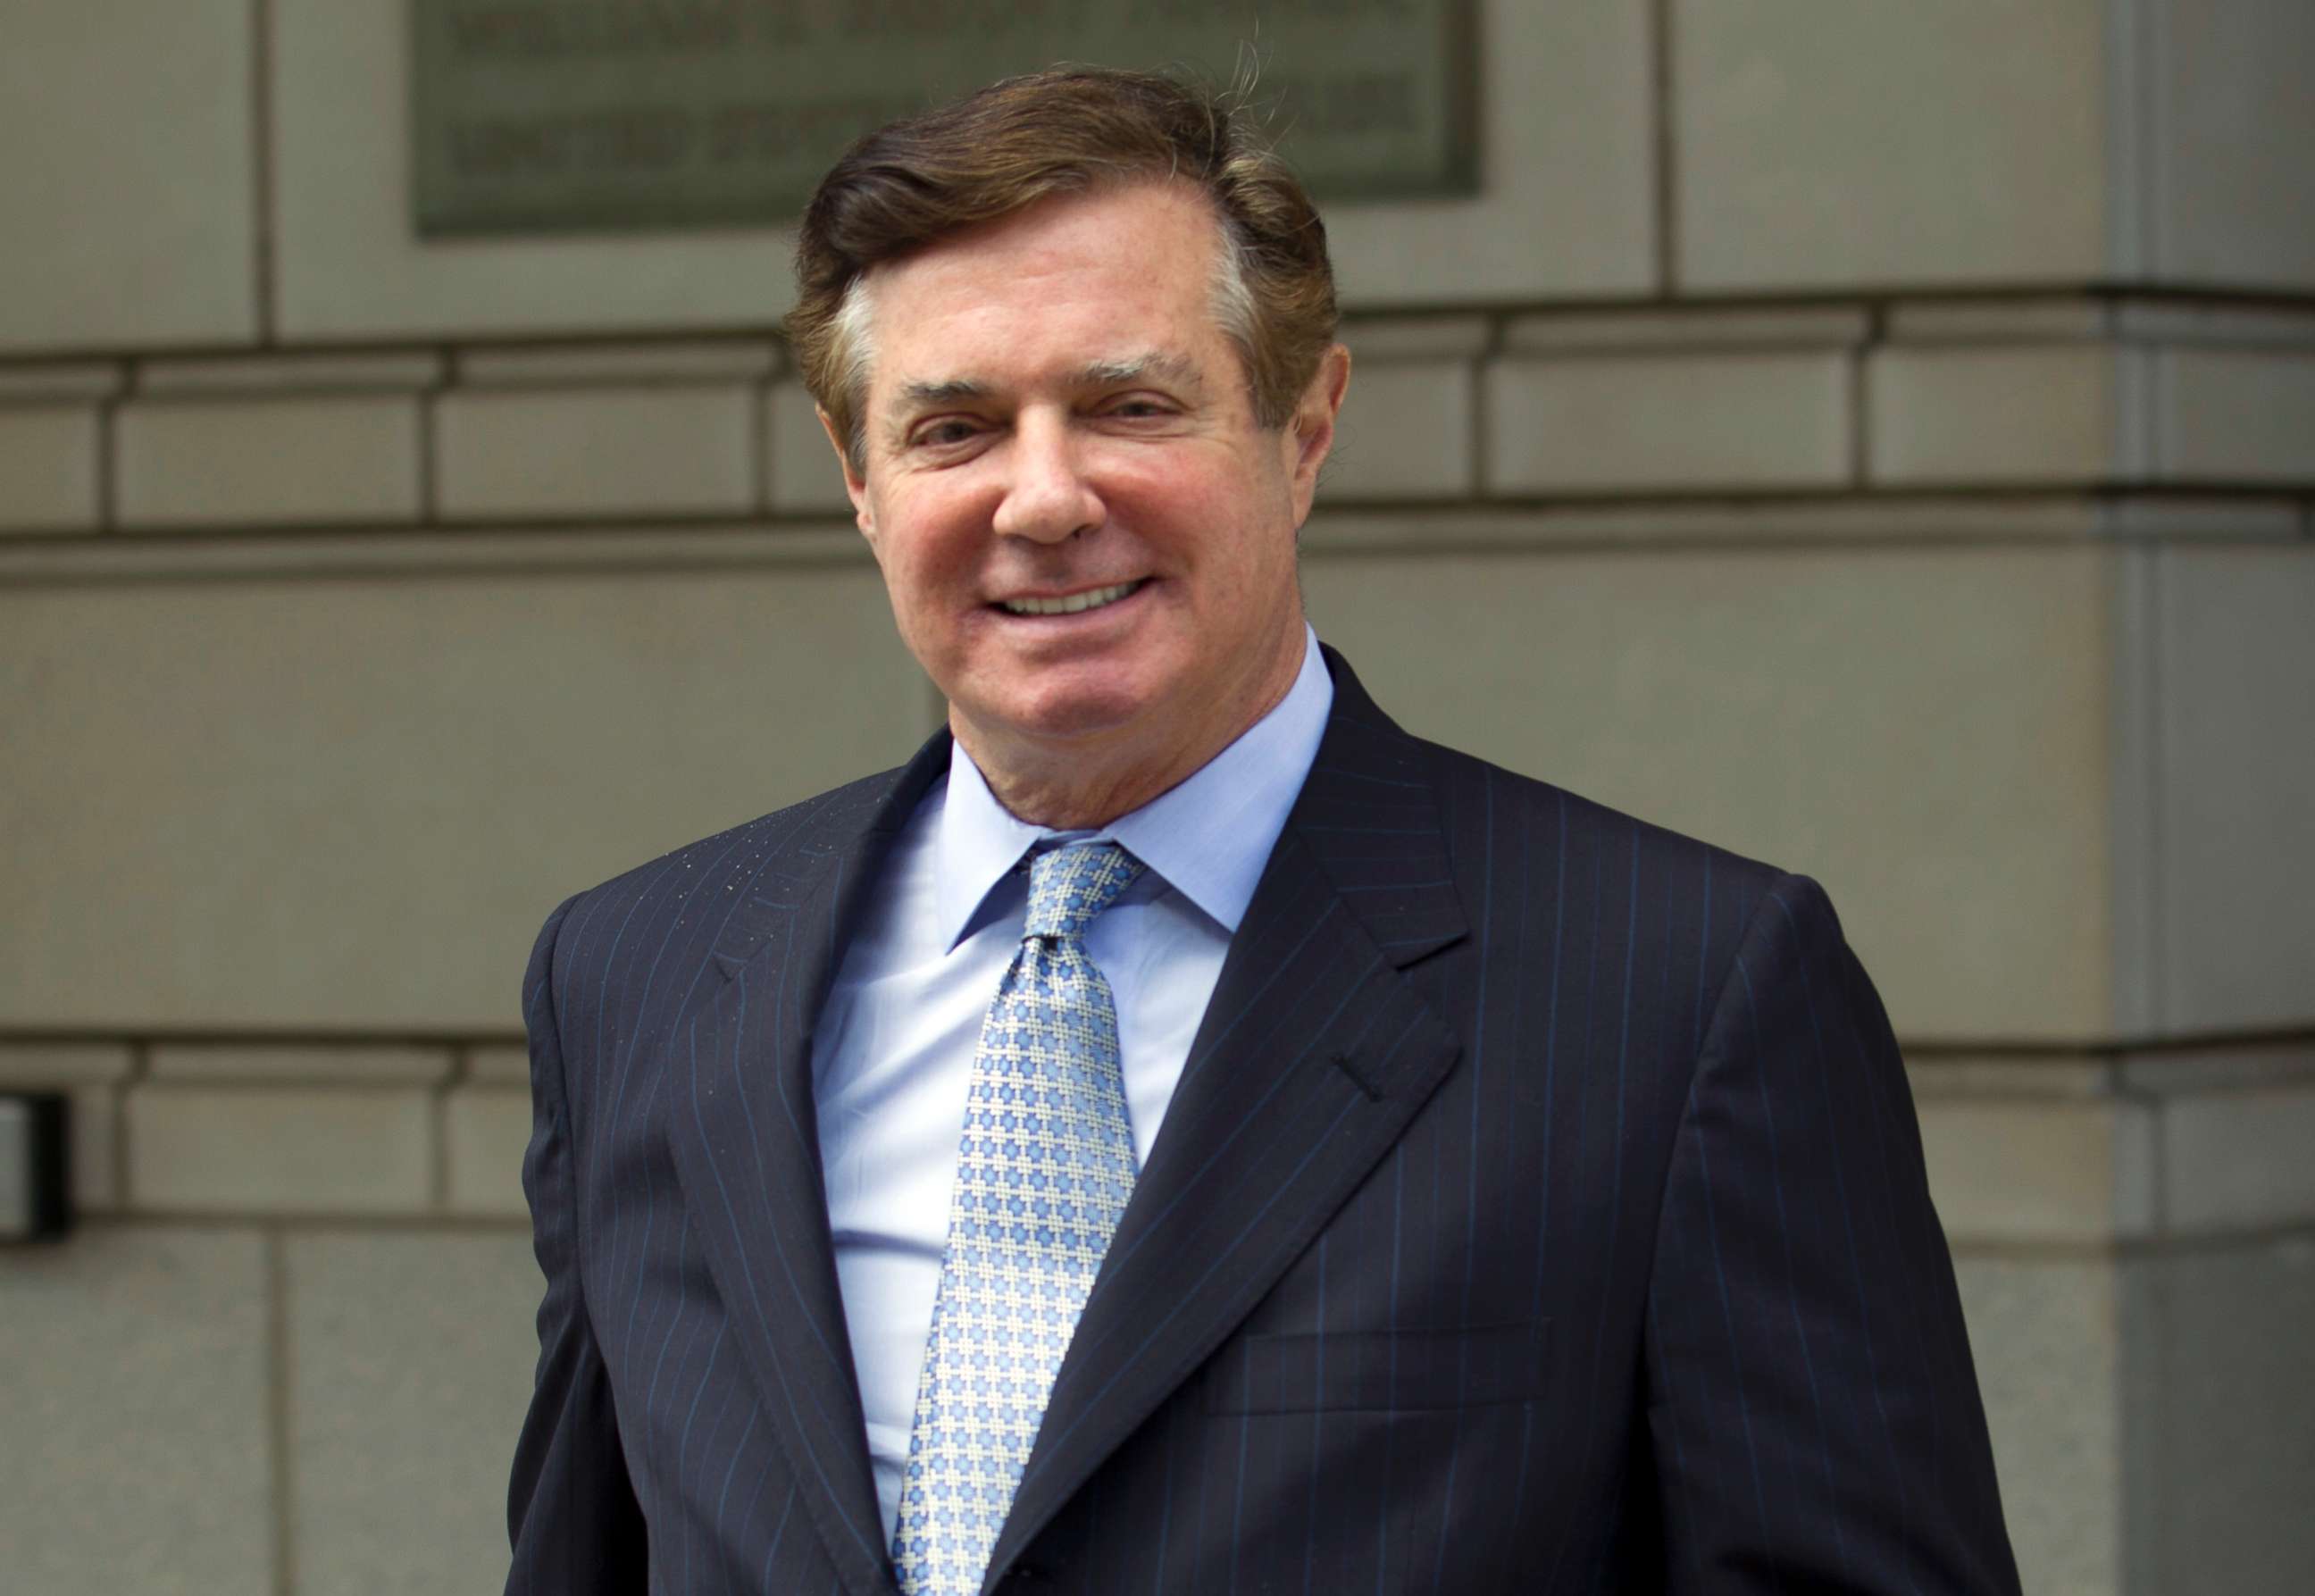 PHOTO: Paul Manafort, President Donald Trump's former campaign chairman, leaves the Federal District Court after a hearing, in Washington on May 23, 2018.